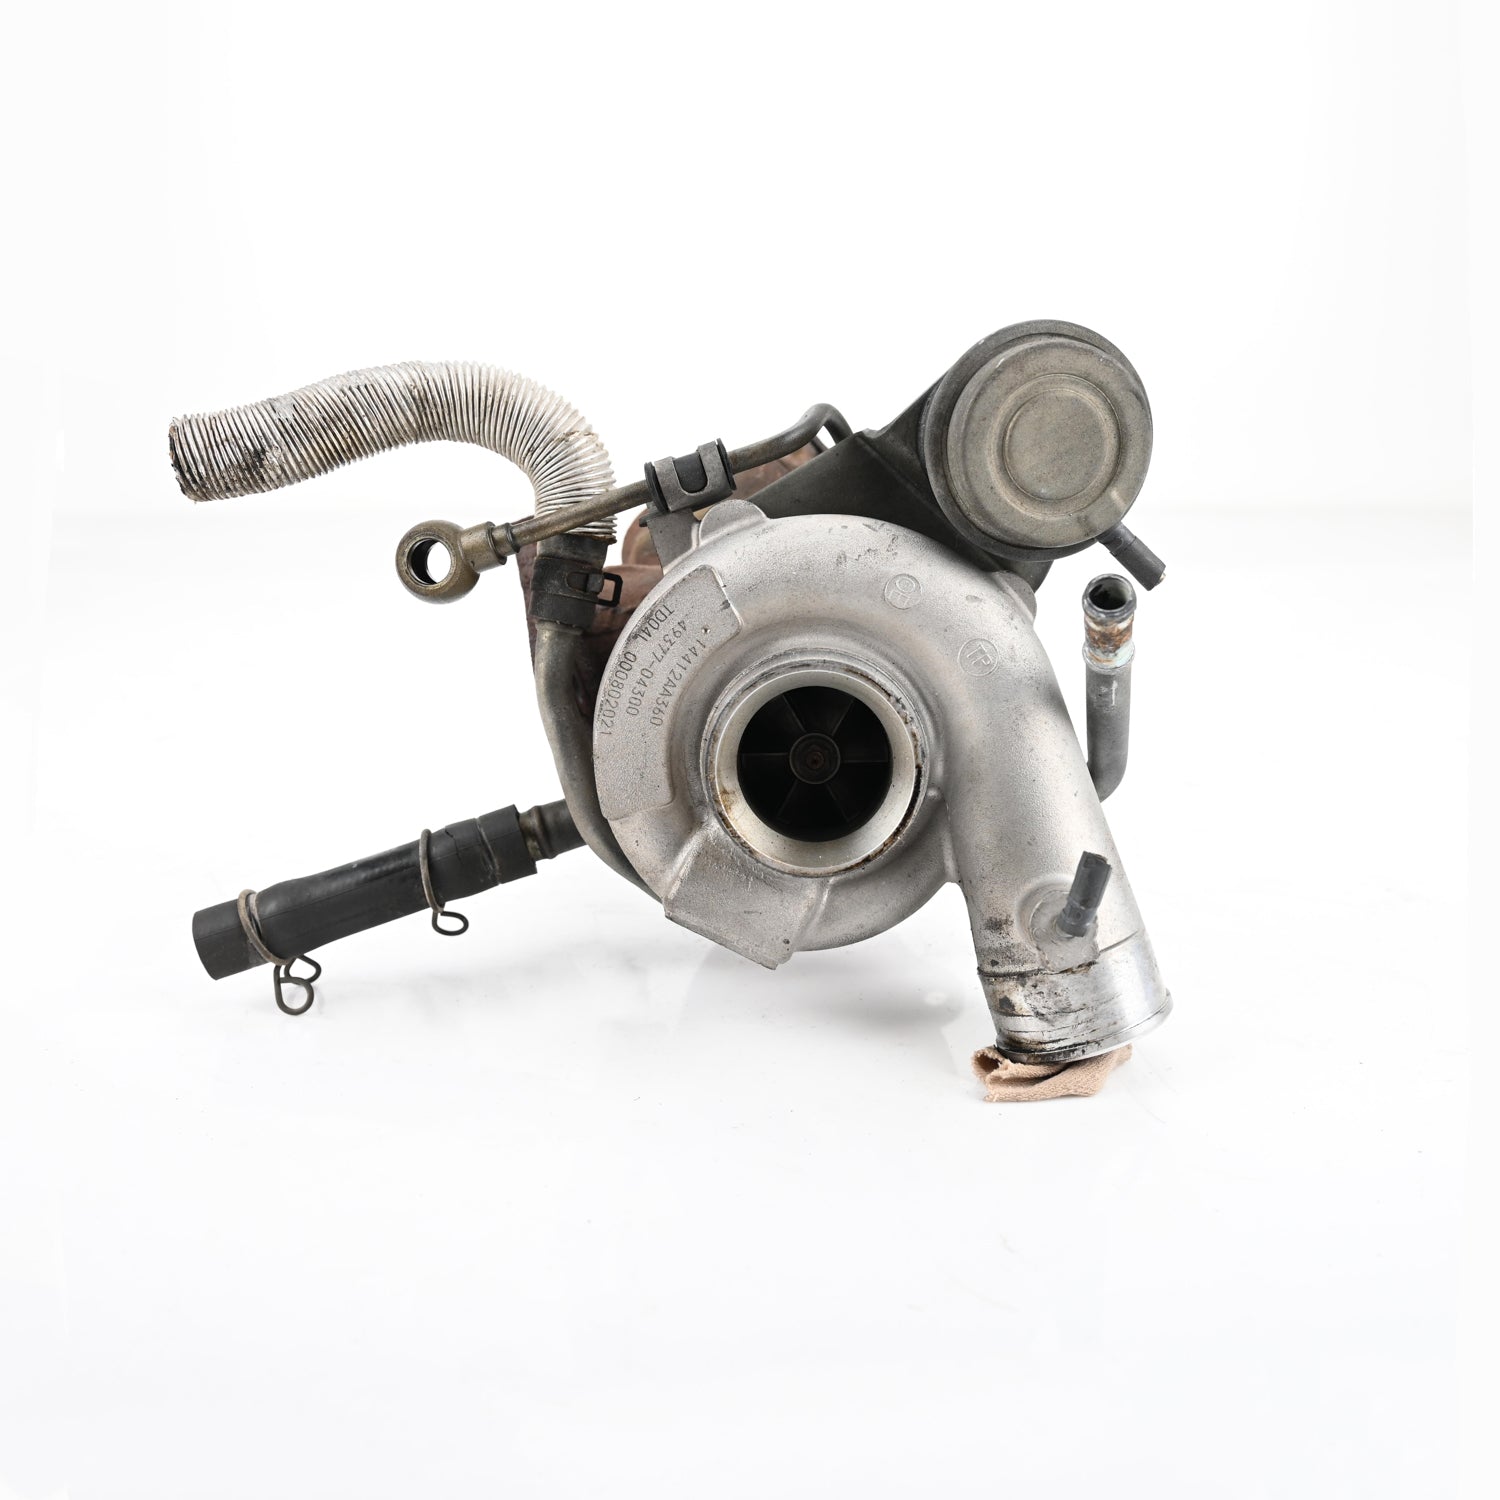 Vf52 Turbocharger with New Core